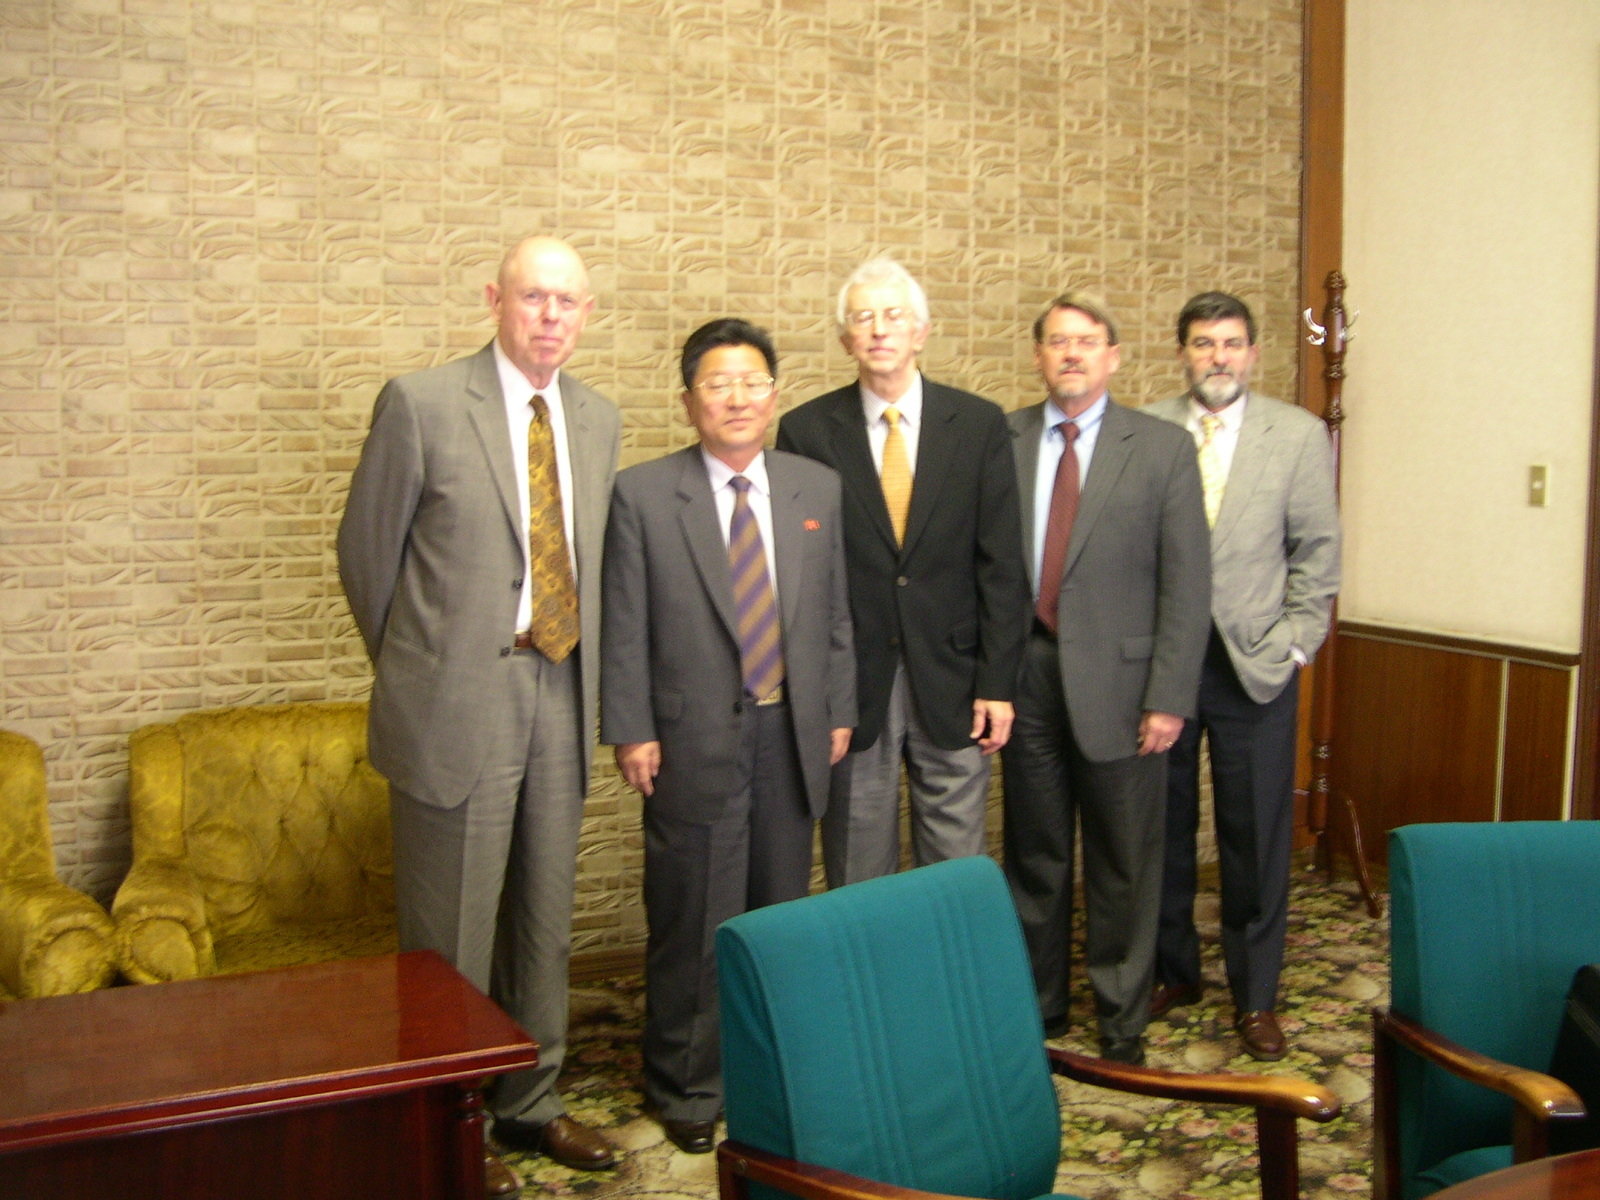 Five men in business suits pose for a photo inside a hotel conference room